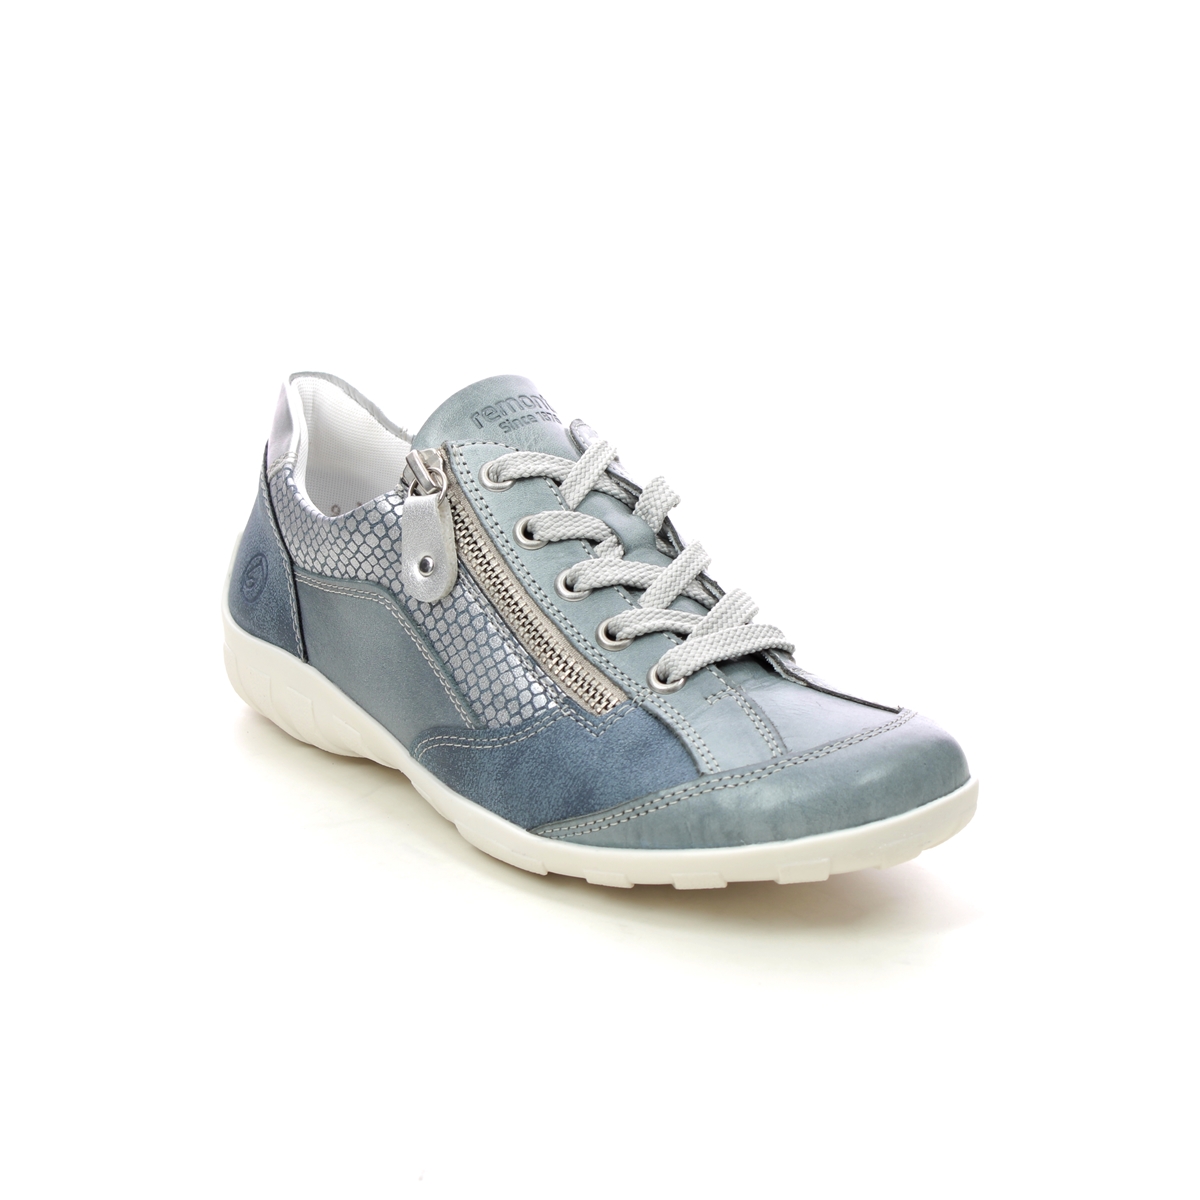 Remonte Livzipa Blue Leather Womens Lacing Shoes R3410-14 In Size 38 In Plain Blue Leather